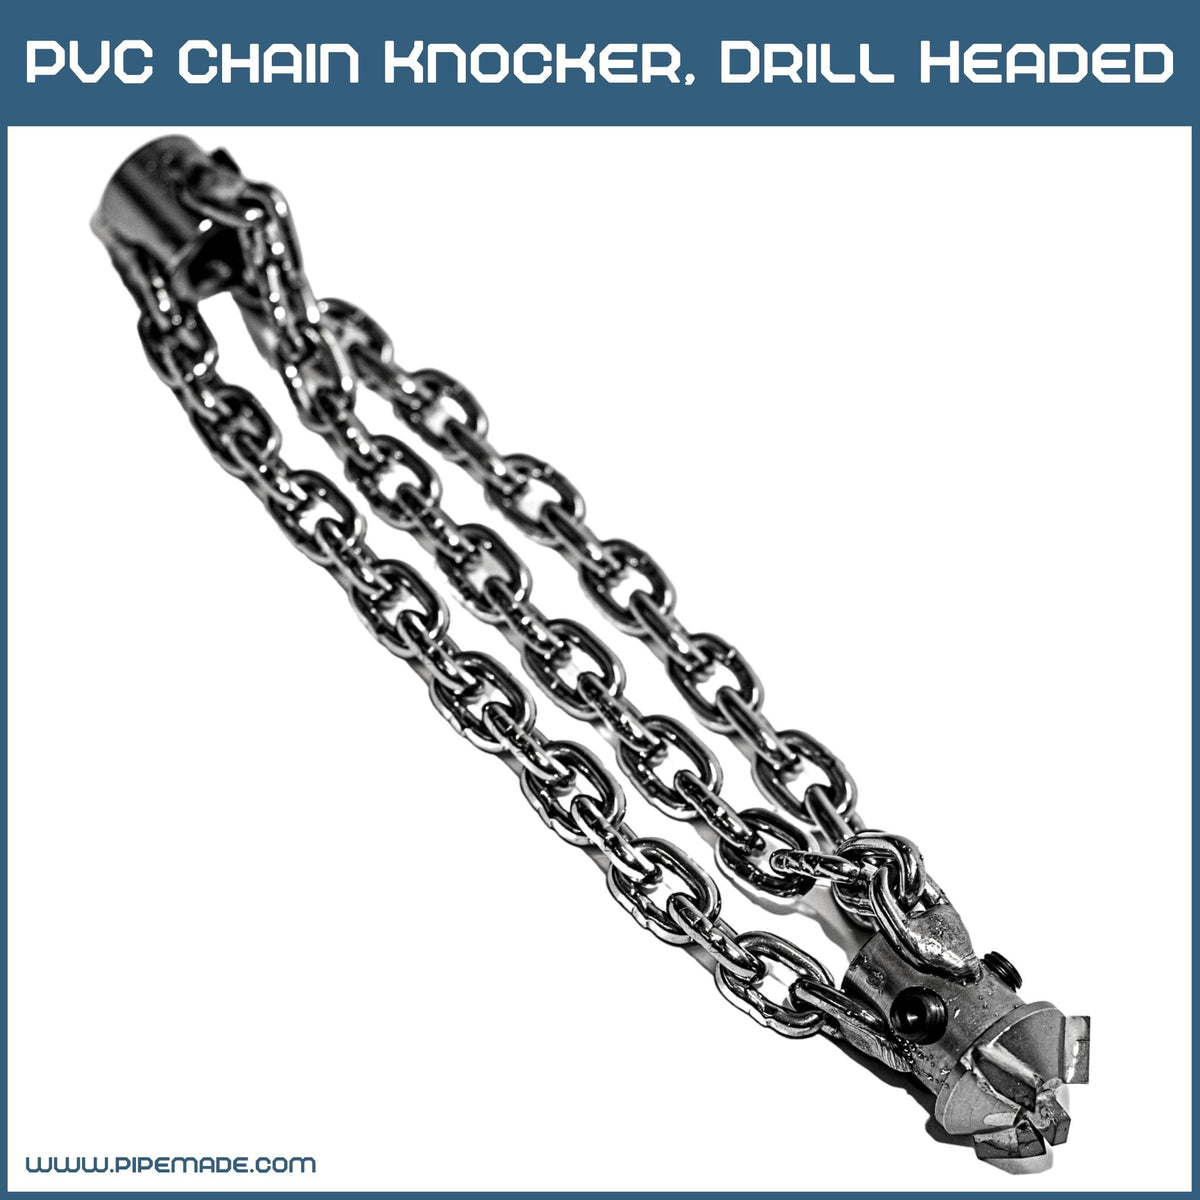 PVC Chain Knocker. Drill Headed | Drill Head Knockers. Plain Chain. Cleaning Chains | Zewer | zewer-plain-chain-knocker-drill-headed